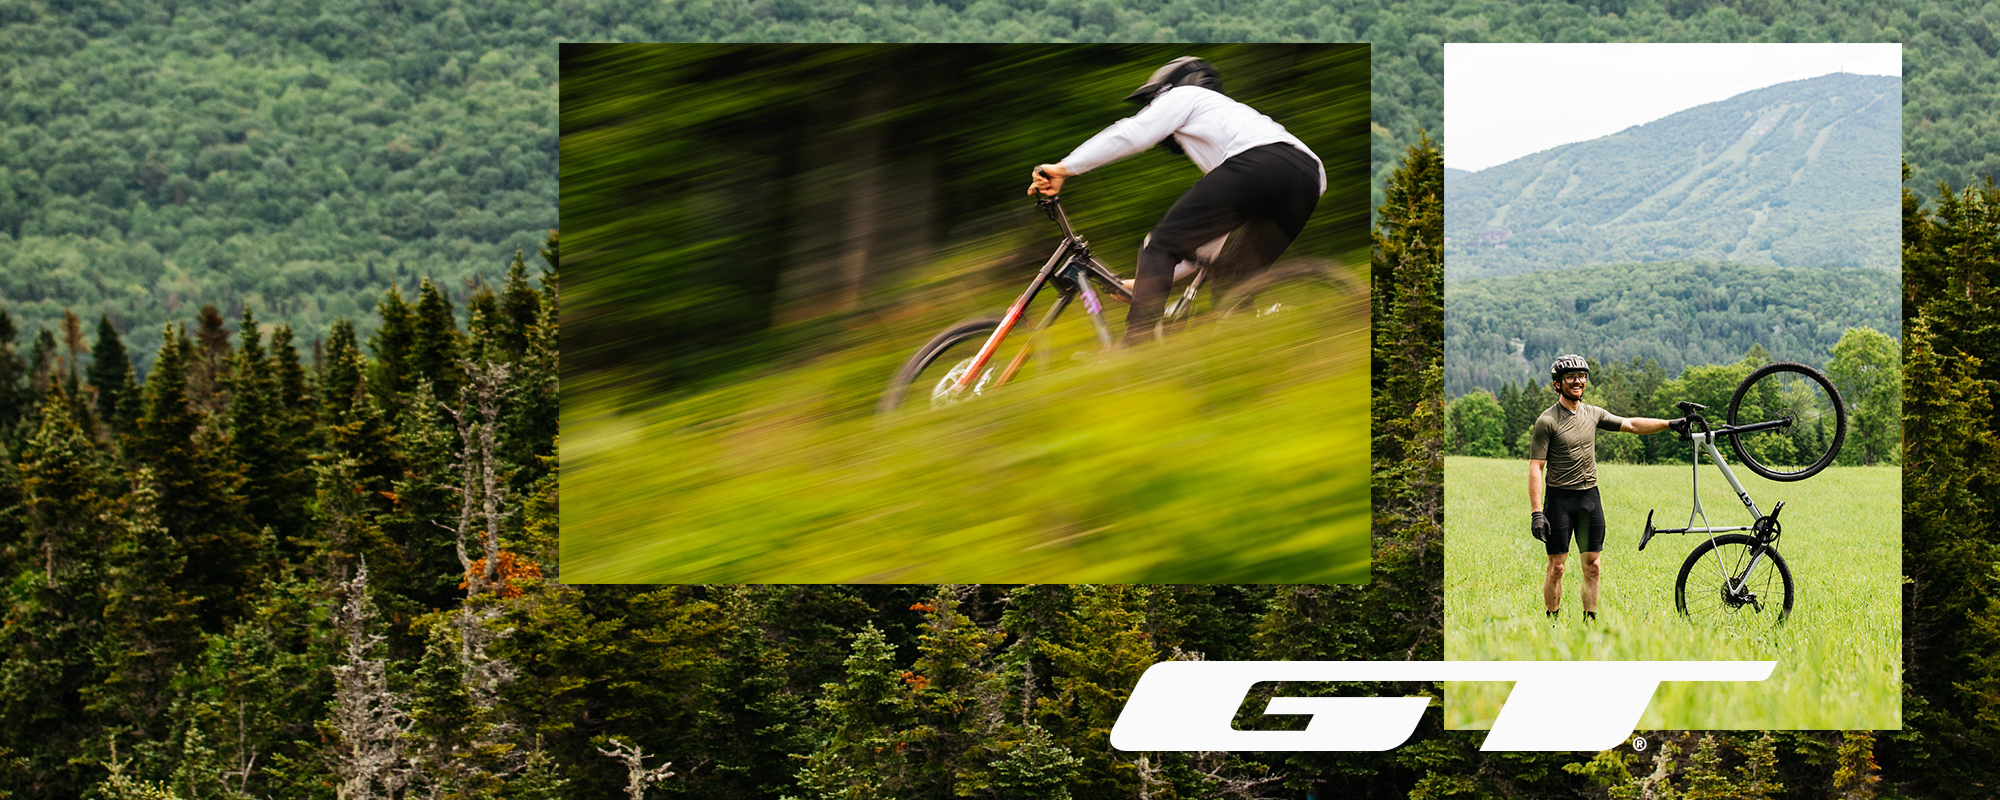 Introducing GT Bikes at Mike's Bikes